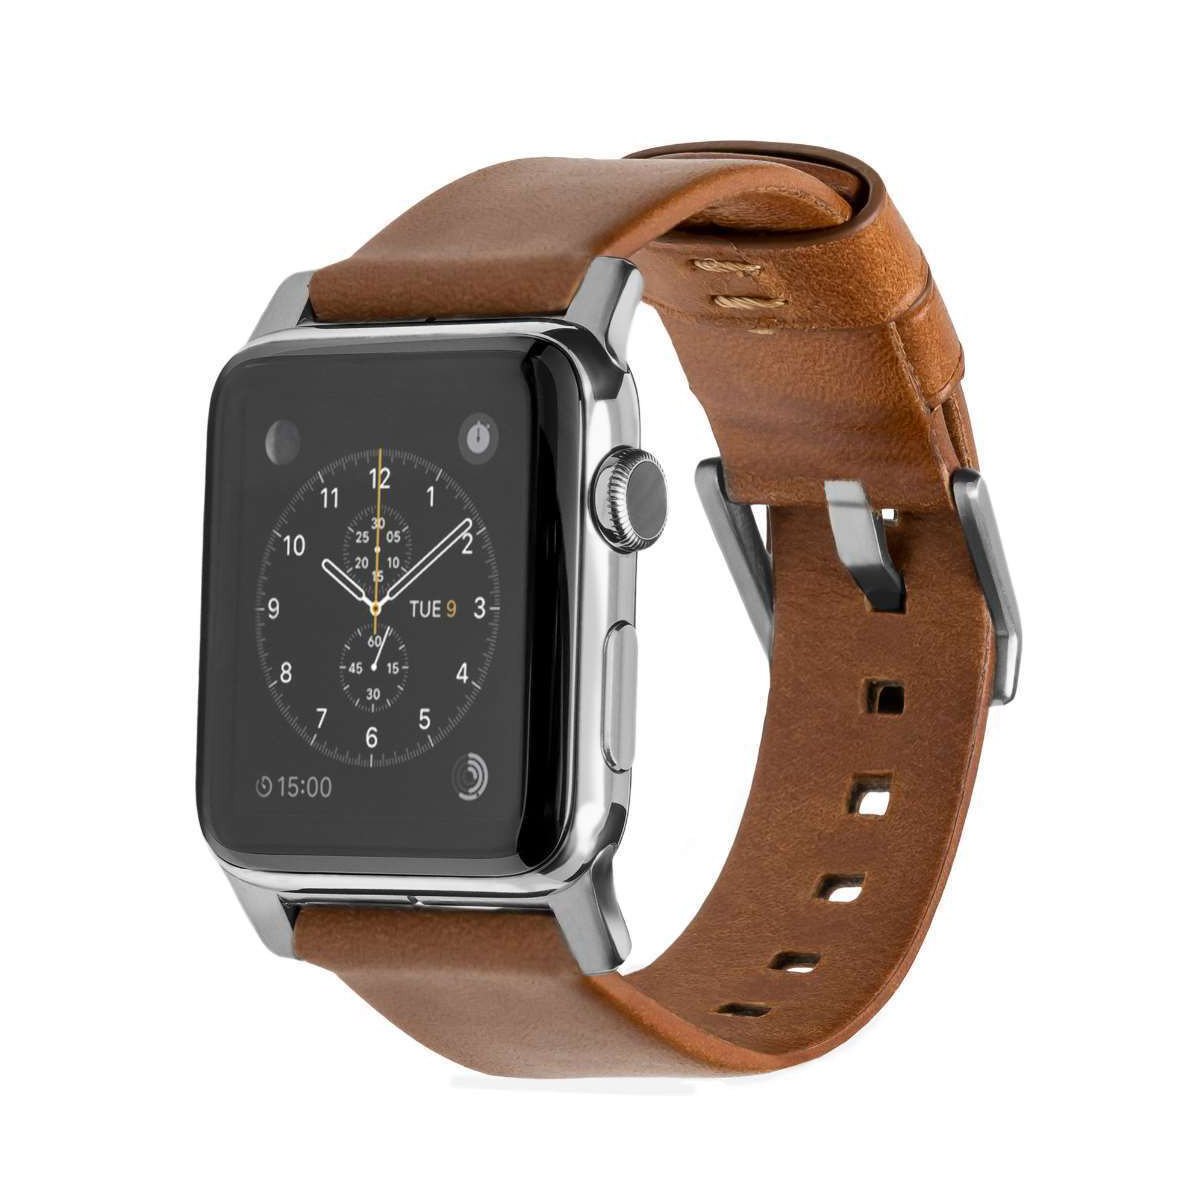 42 45 Addict / | Watch BROWN NOMAD /49mm- Mac Horween / RUSTIC 44 Band Apple Leather For